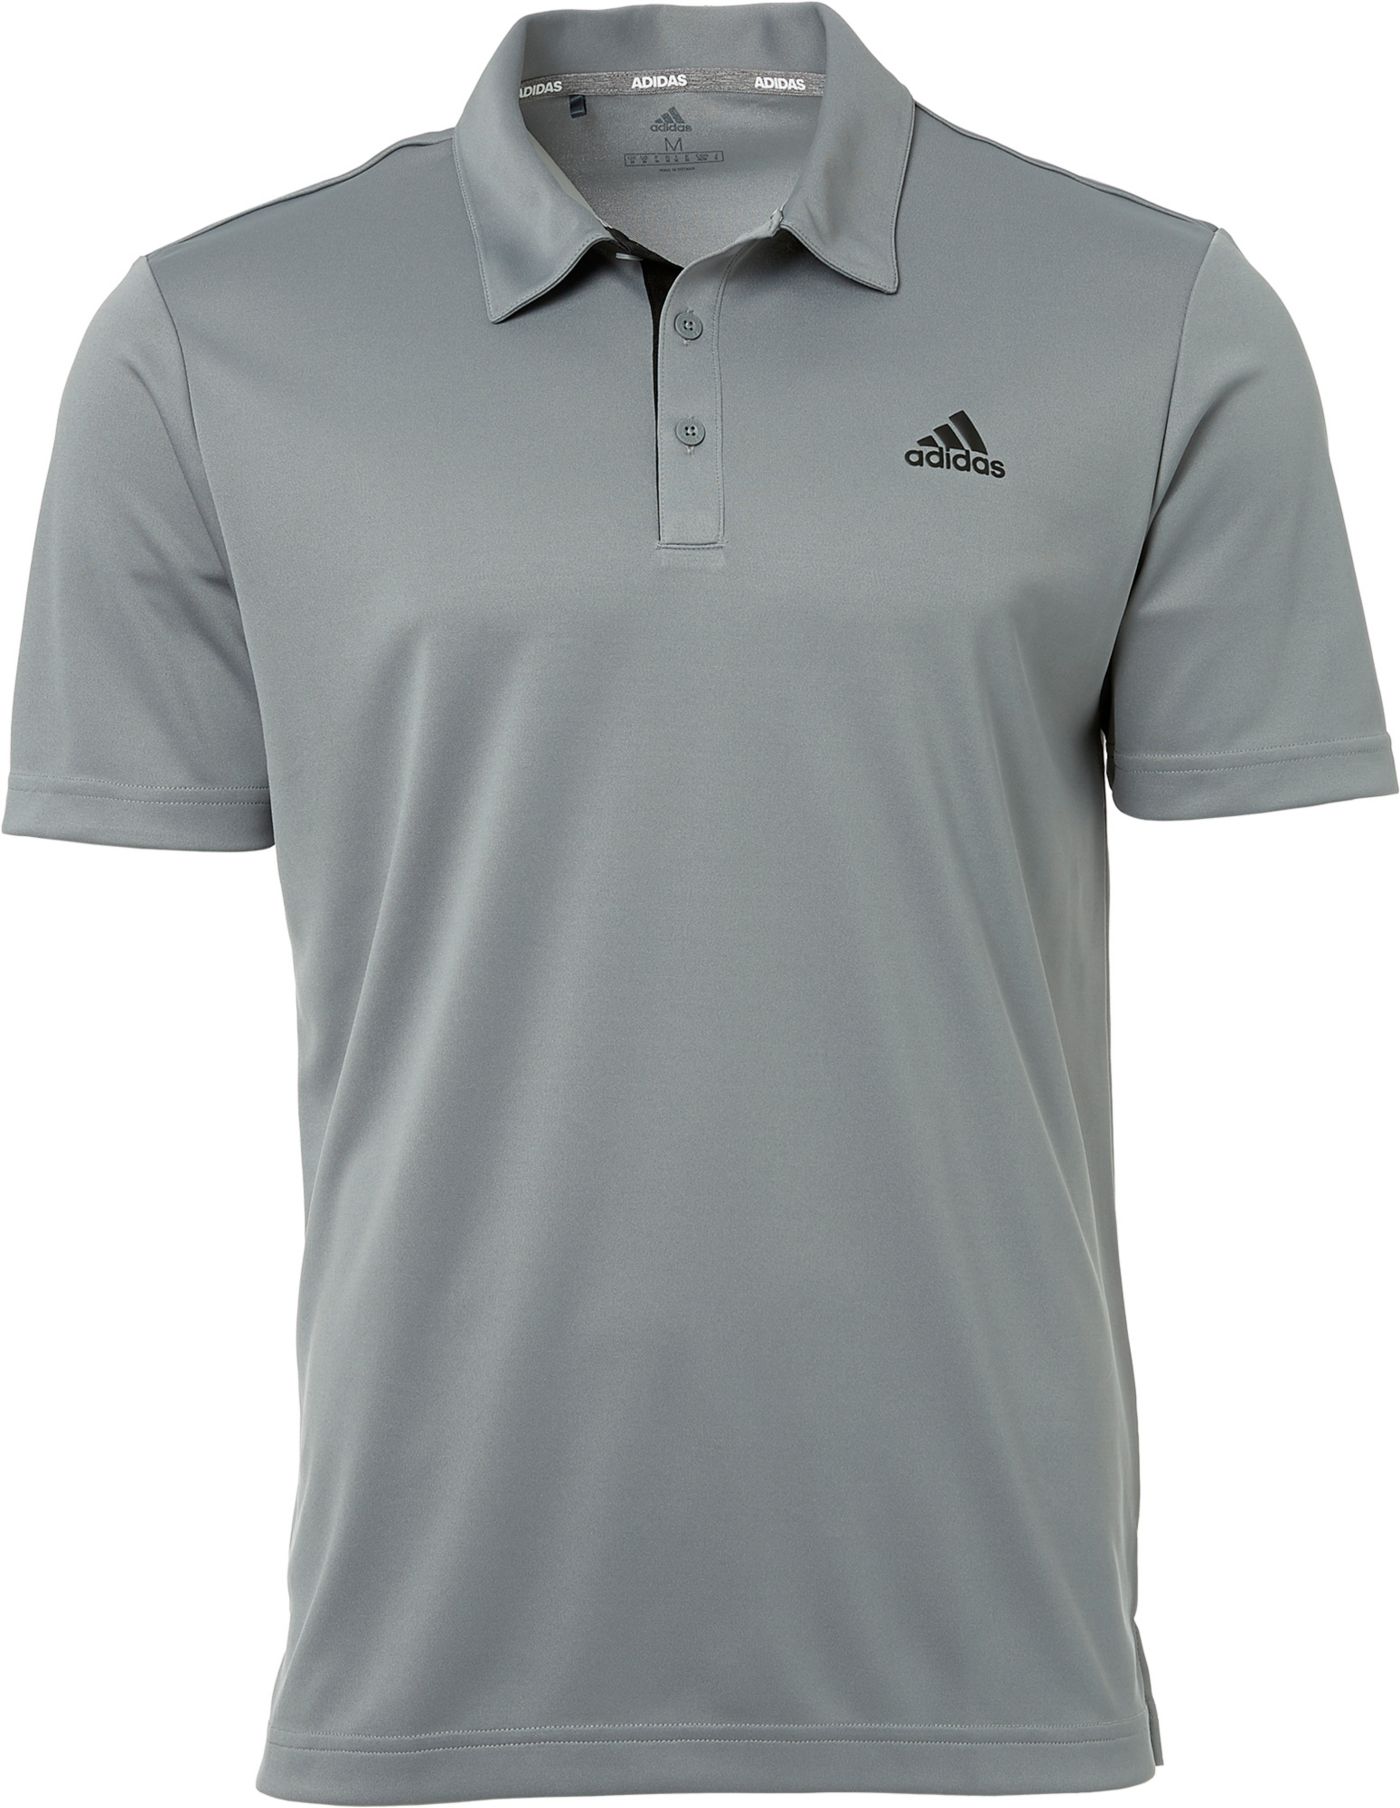 adidas Men's Drive Novelty Solid Golf Polo | DICK'S Sporting Goods